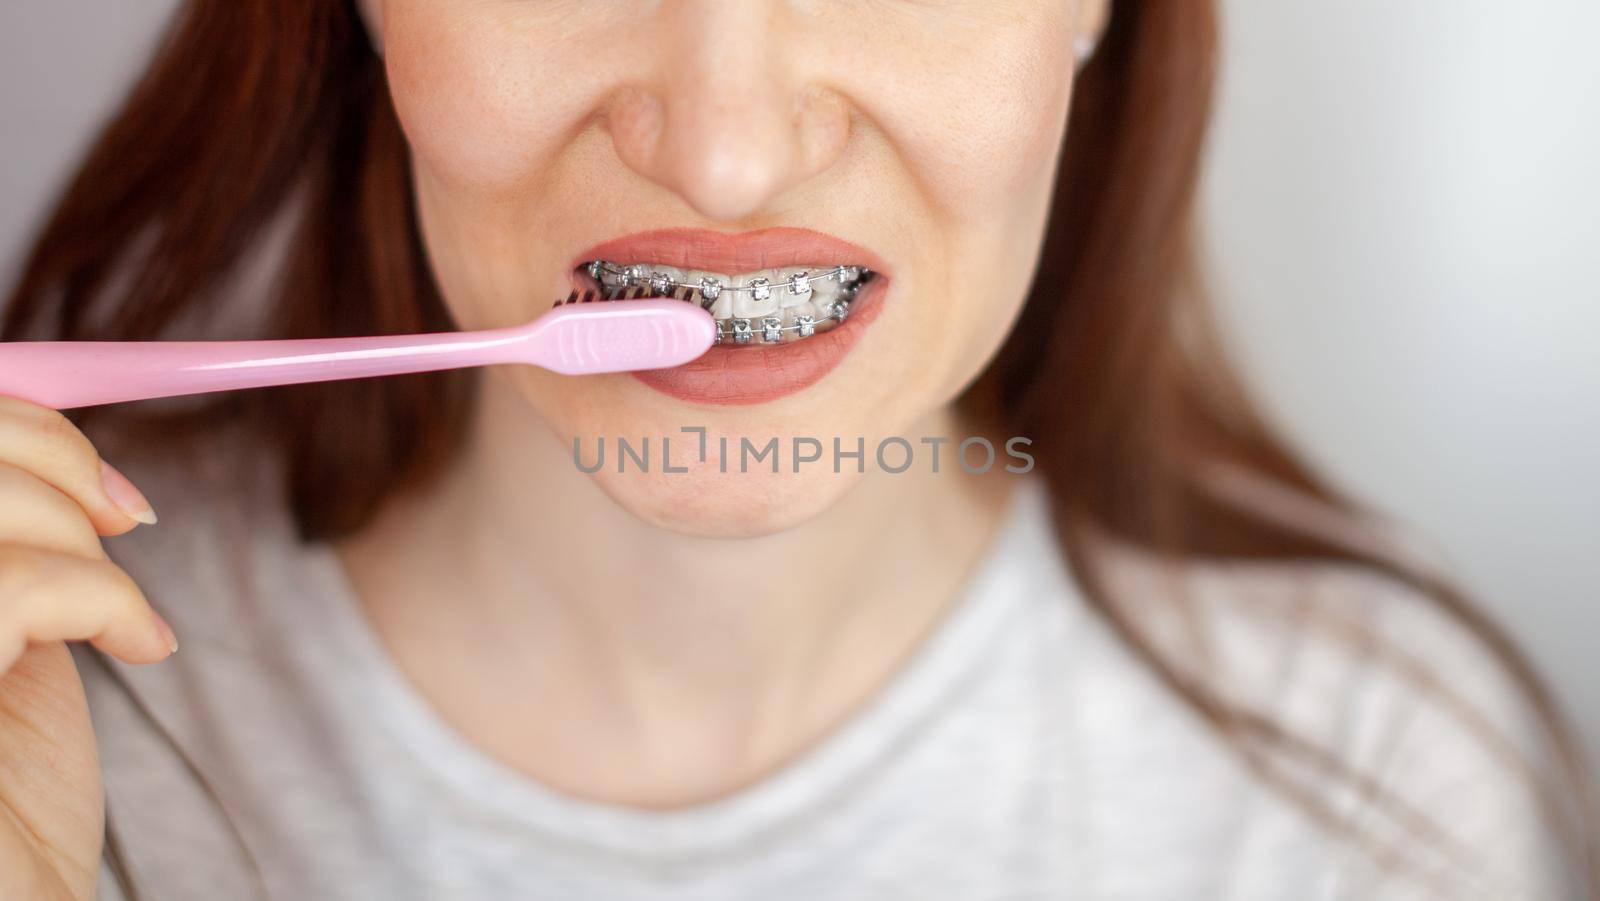 A girl with braces on her white teeth and a toothbrush by AnatoliiFoto